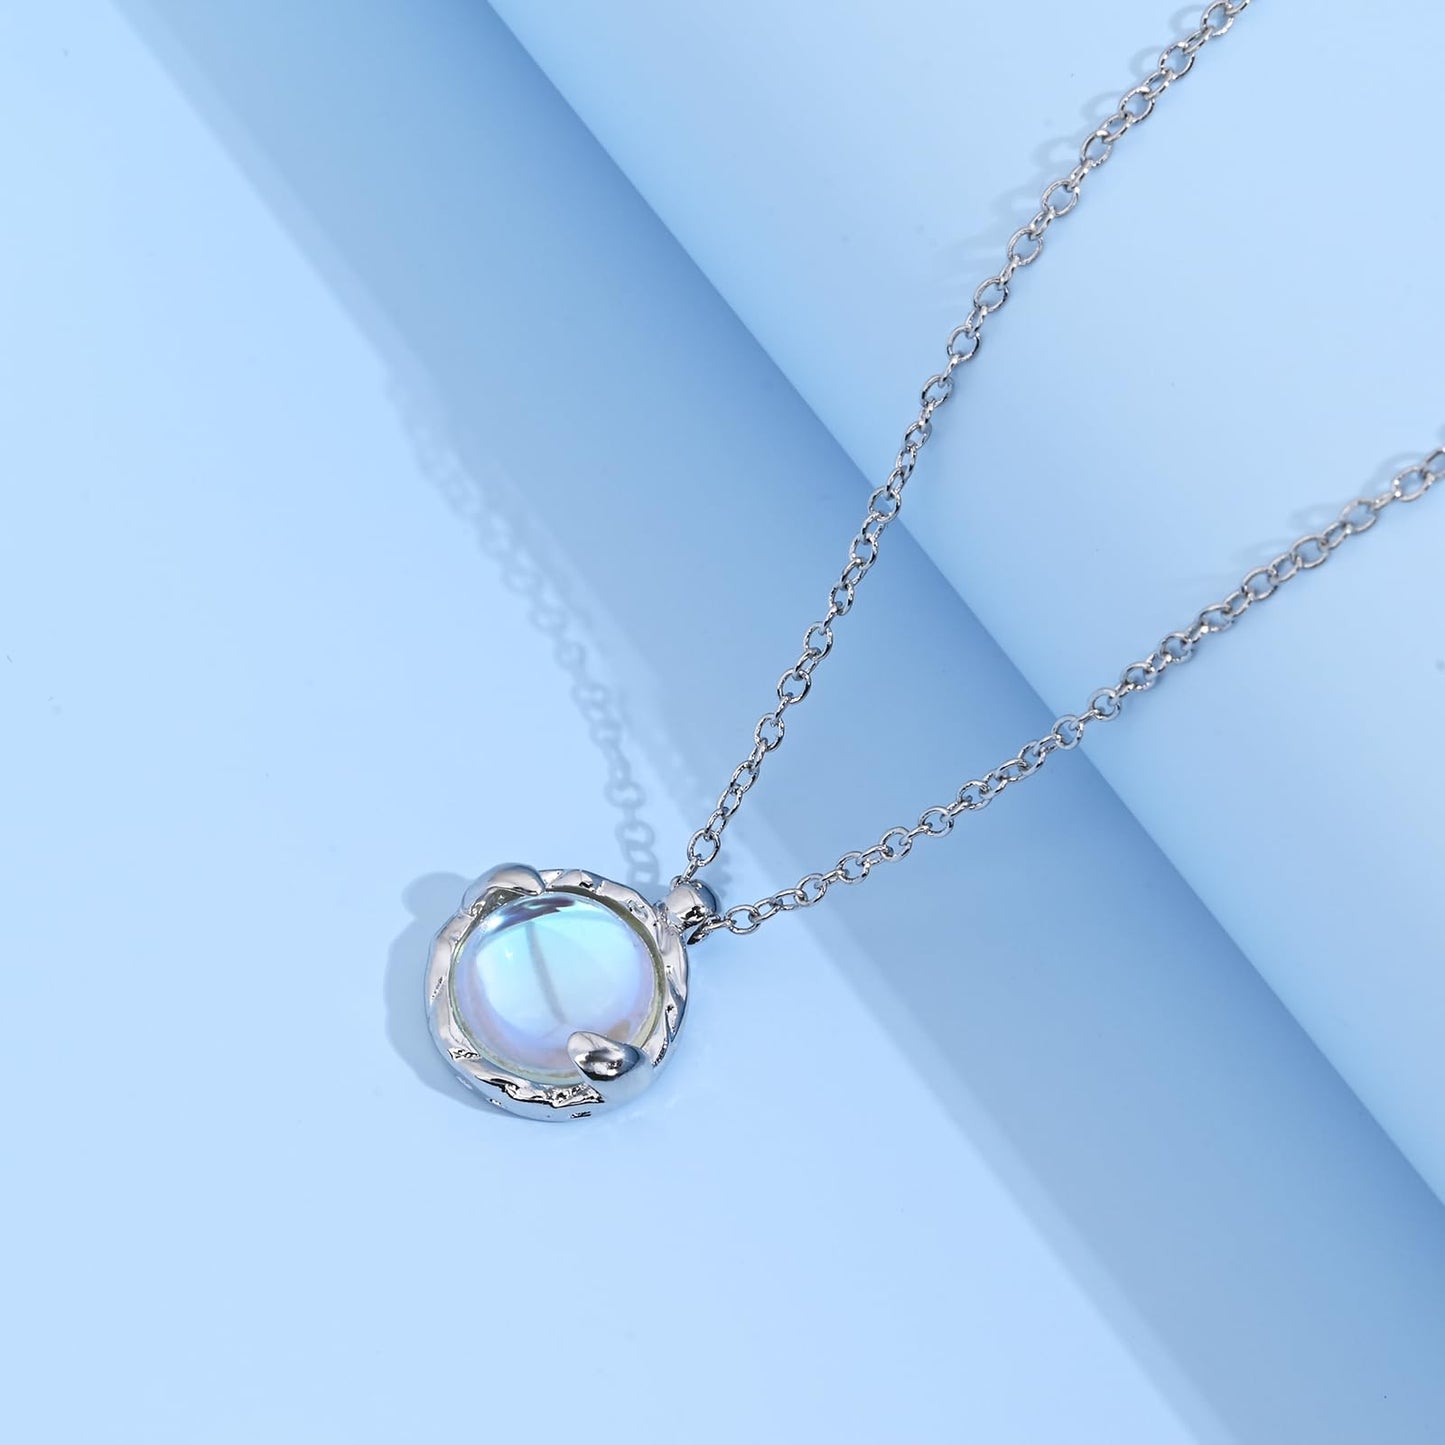 Circle Moonstone Necklace Blue Gemstone Pendant Necklace for Women Silver Handmade Necklaces Moonstone Jewellery for Gift